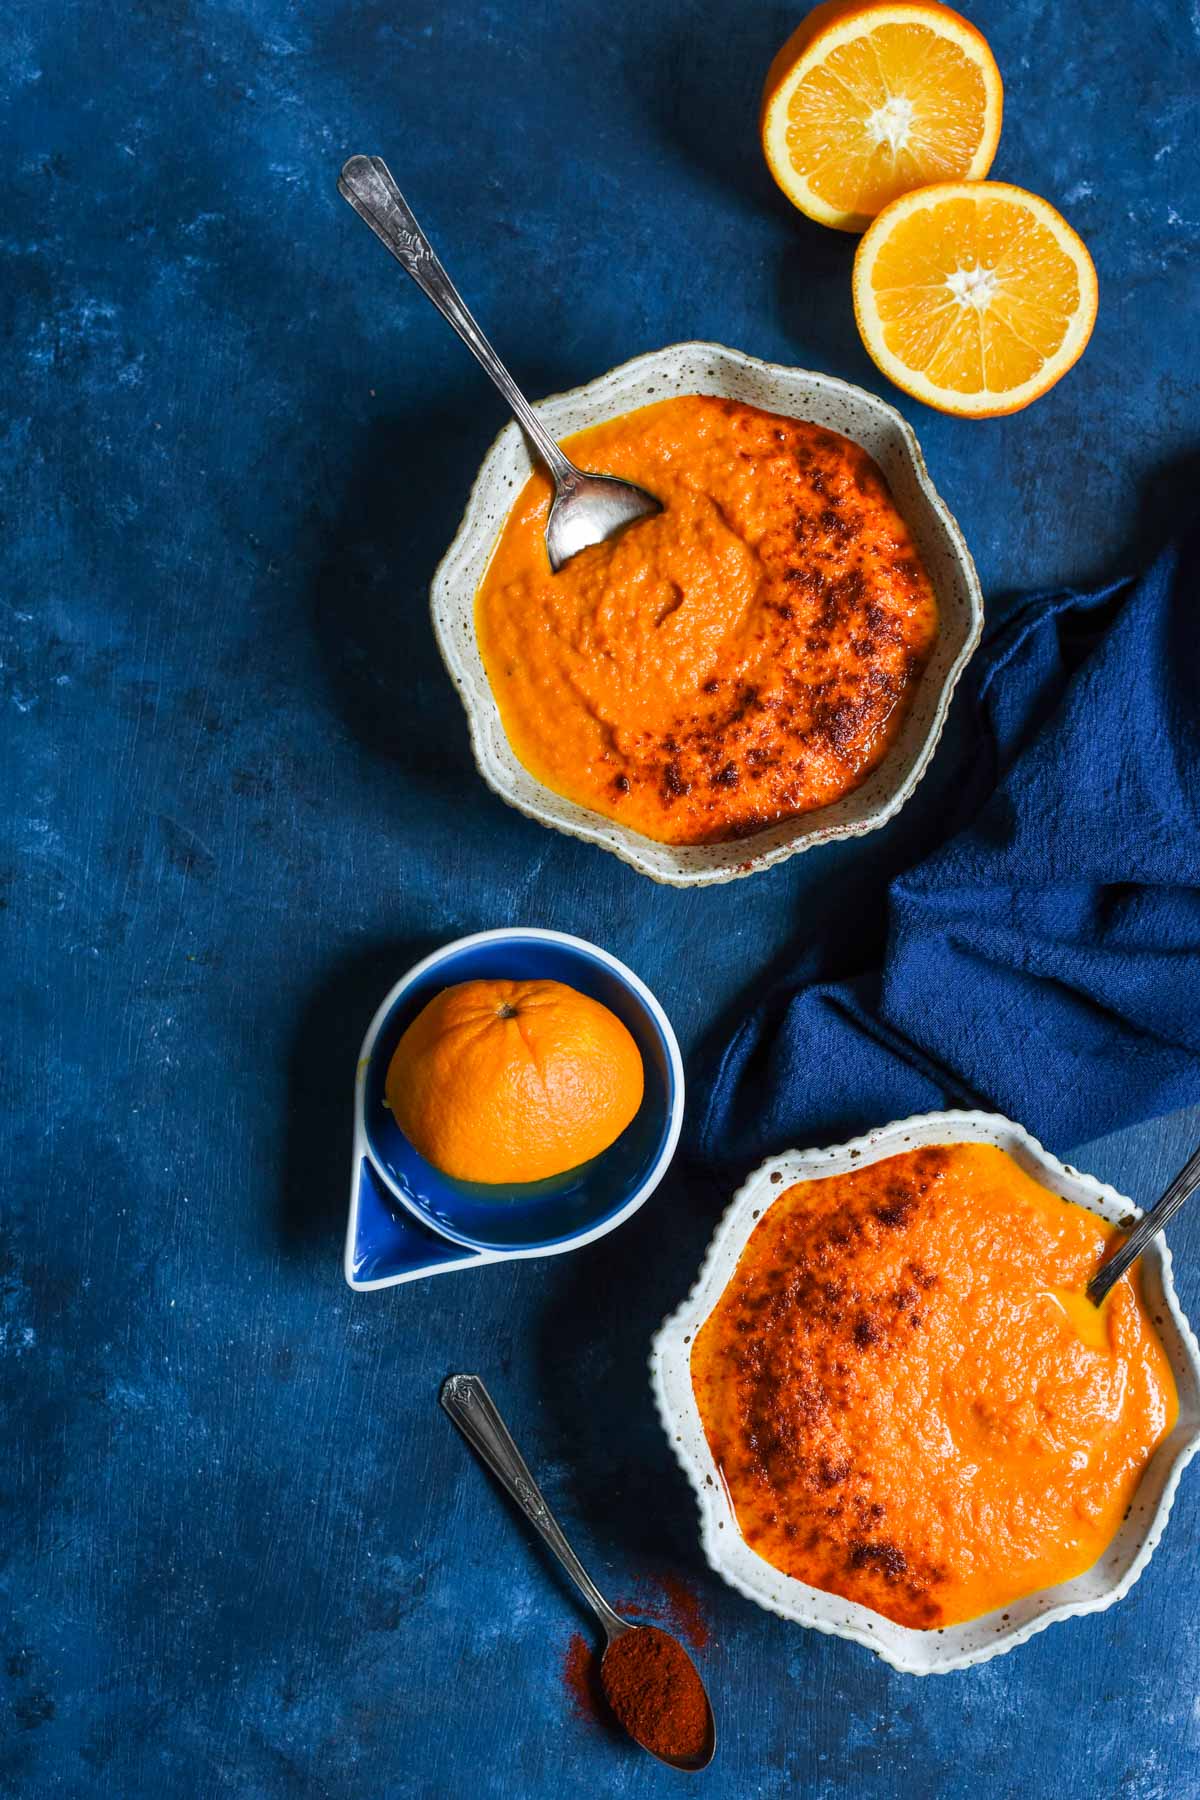 This Creamy Carrot Orange Soup is bright and comforting, with just a little bit of heat. It's my new favorite side dish for a grilled cheese!